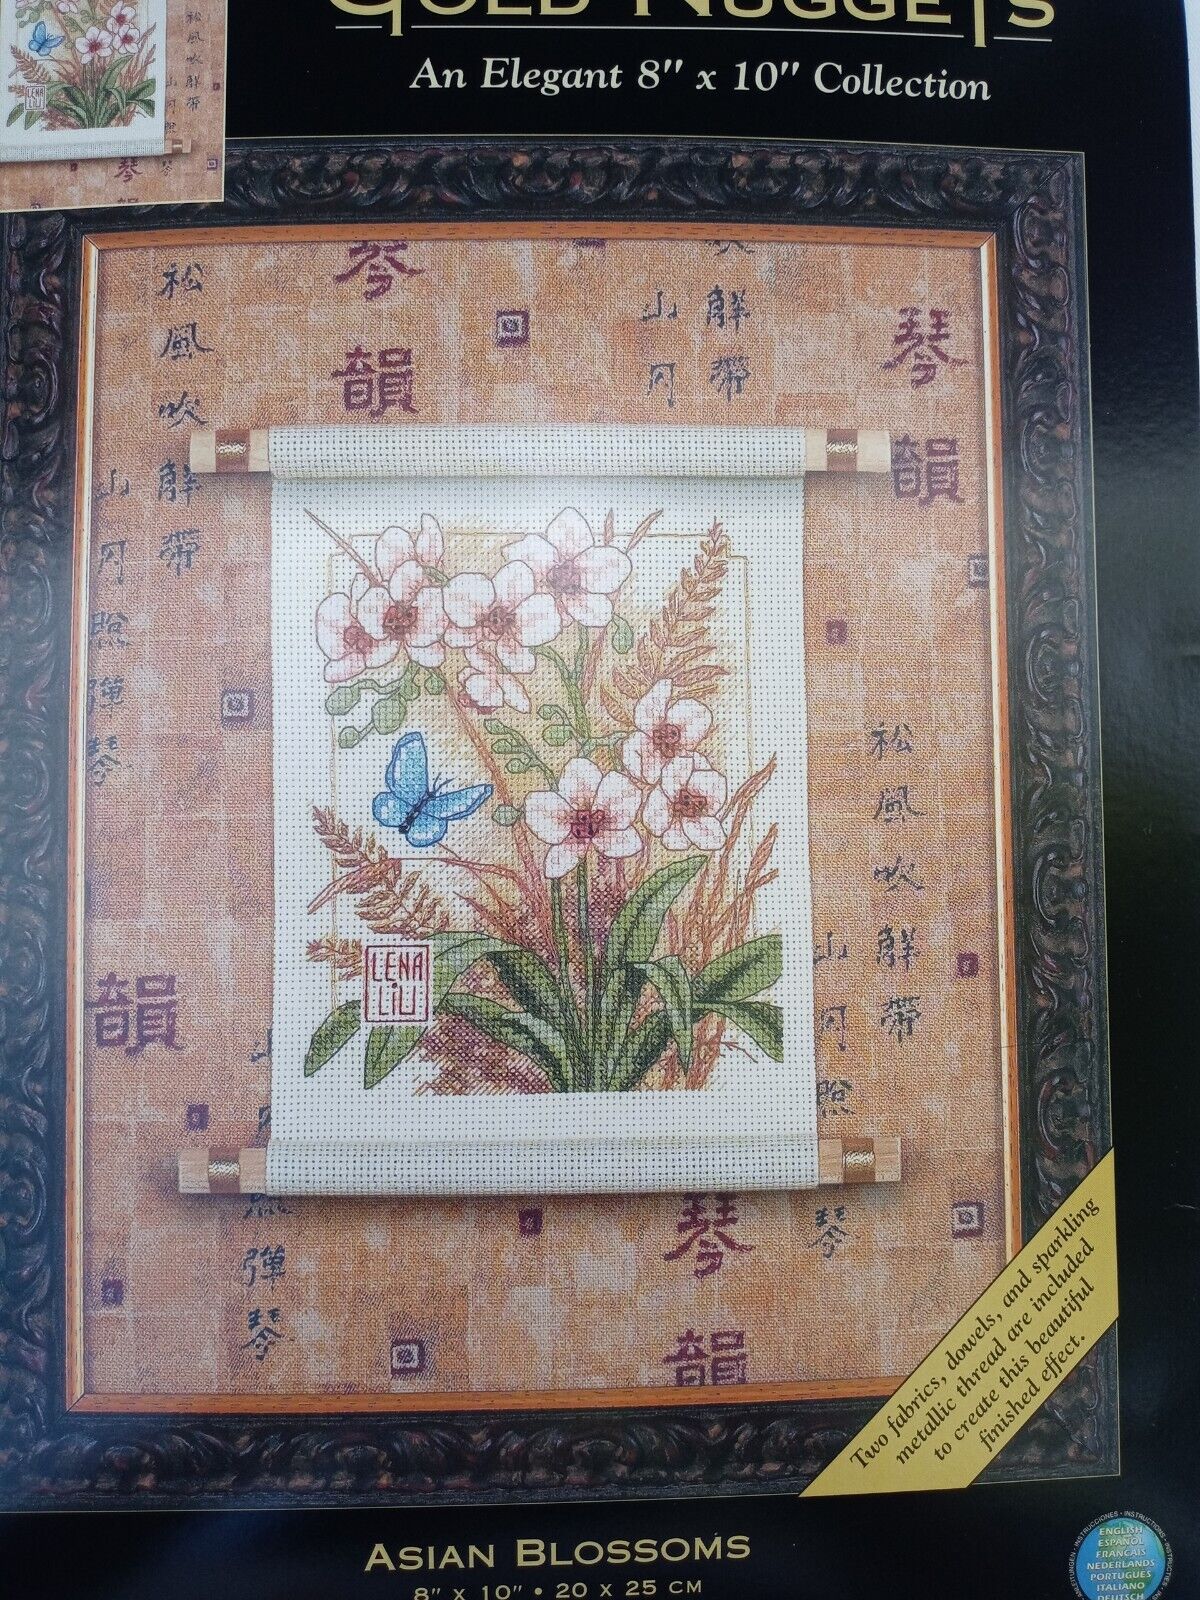 Dimensions 35127 Gold Nuggets Asian Blossoms Counted Cross Stitch Kit  8